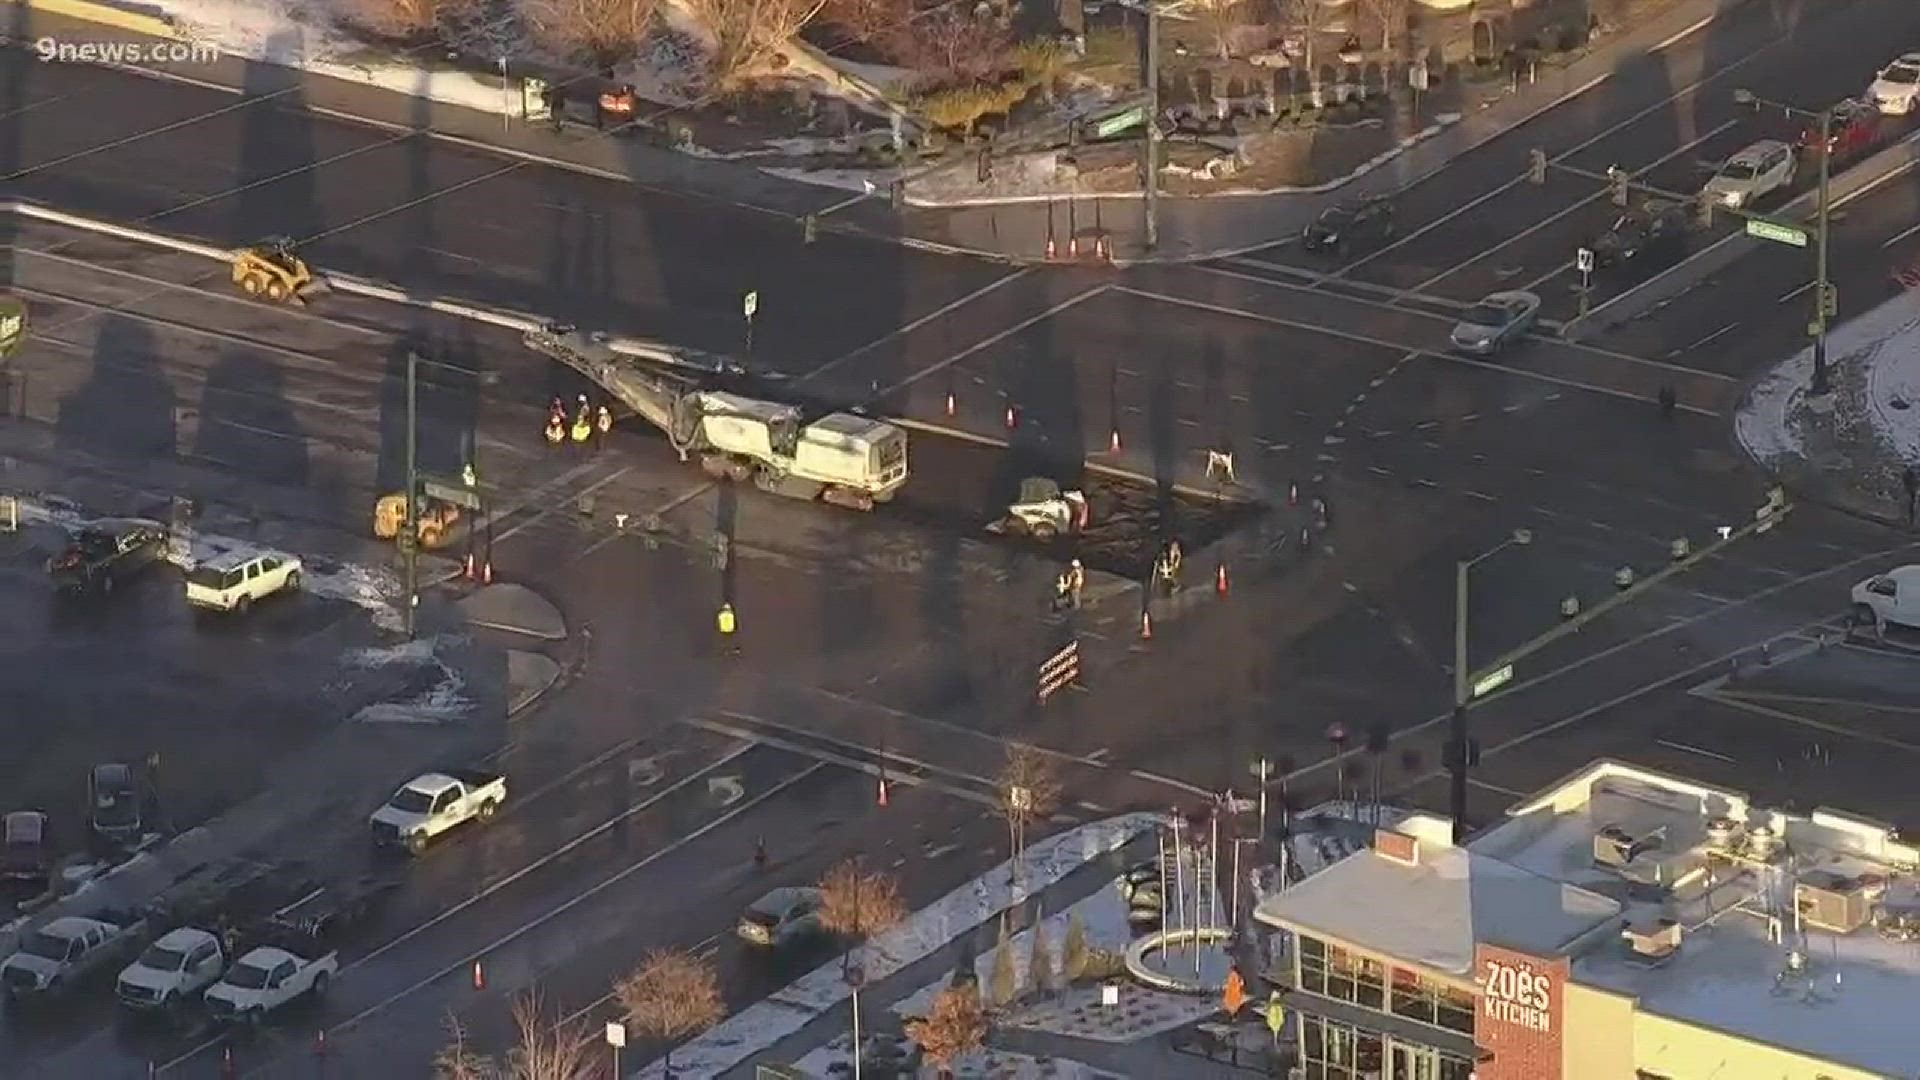 In a tweet, Denver Water said repairs would last through the night as crews continue to repair the road. All lanes are expected to reopen by 6 a.m. Thursday, which is about 24 hours from when the break was first reported.